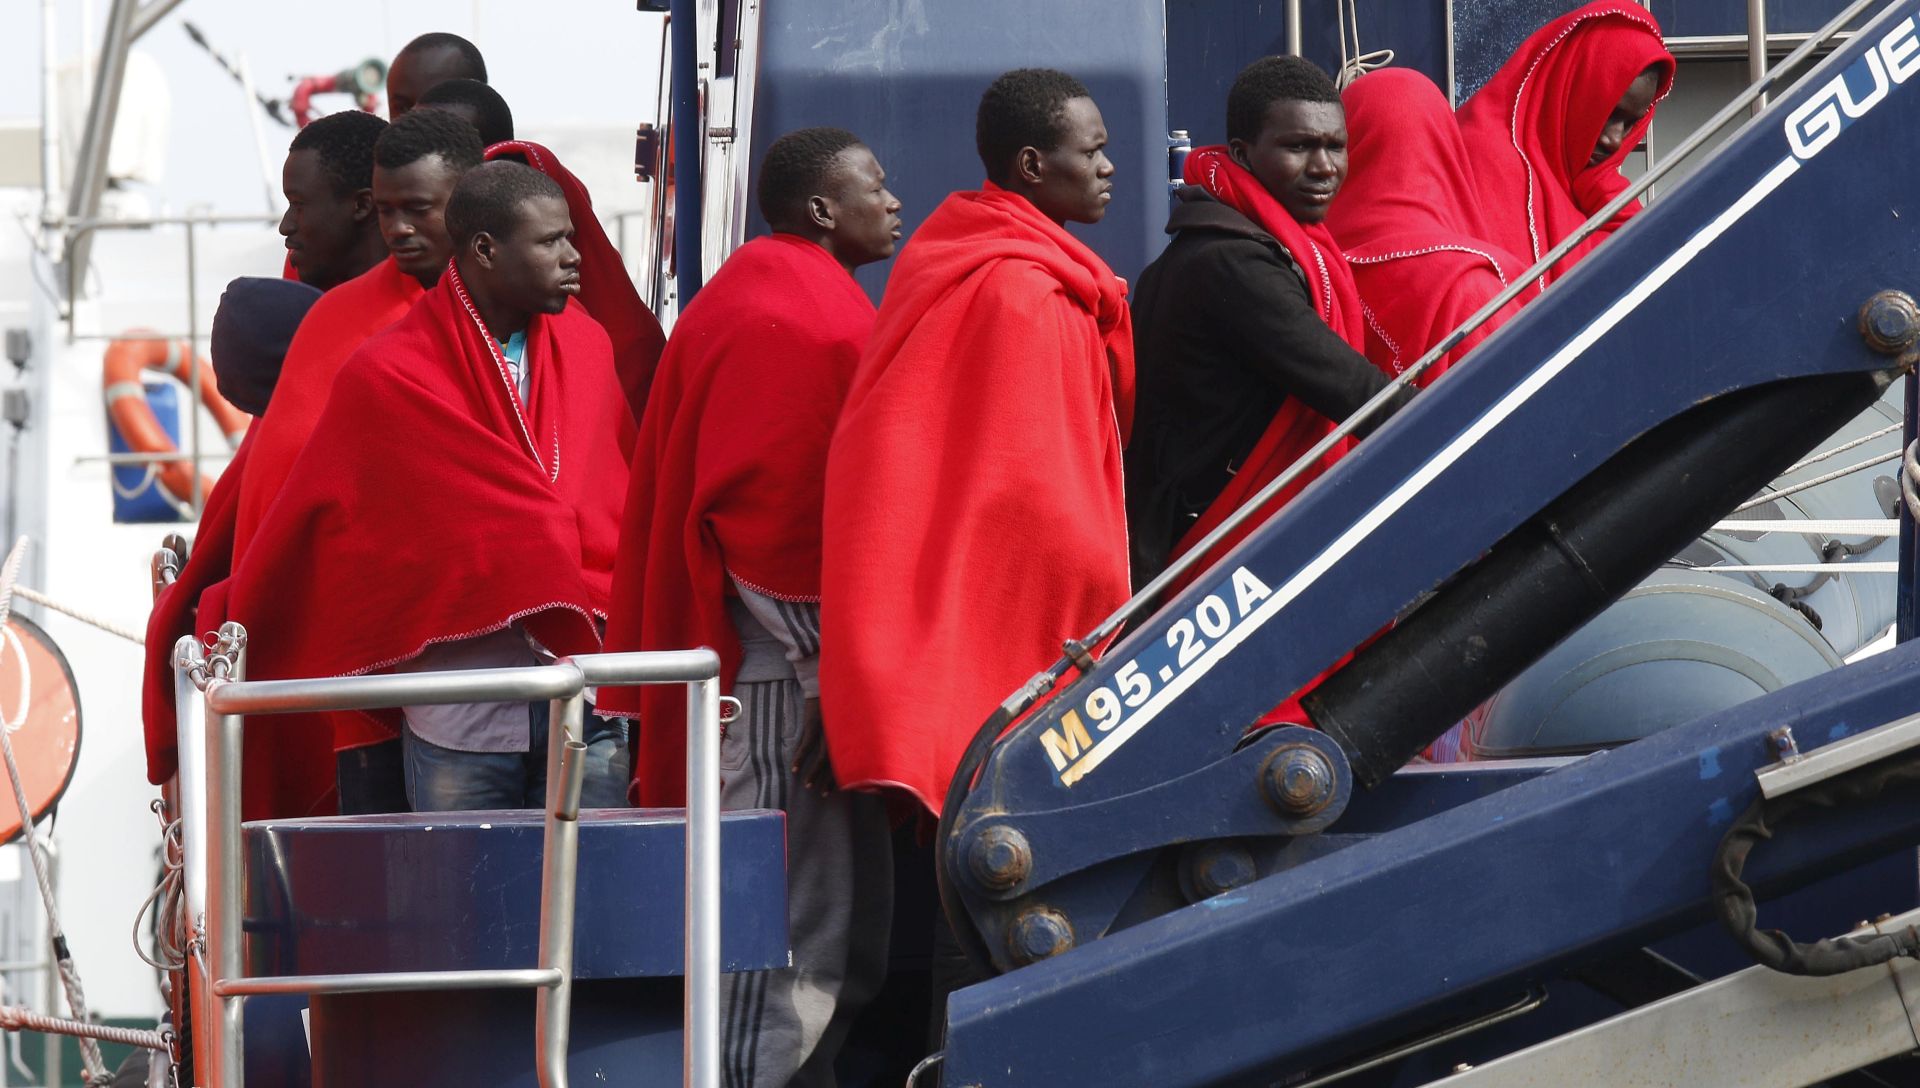 epa05860410 Some of the 32 migrants that have been rescued by Spanish Nary Rescue members arrive in the port of Almeria, Spain, 20 March 2017. A group of reportedly 32 migrants were rescued by the Spanish Navy when they travelled some 18 milles off the coast of the Alboran Island.  EPA/CARLOS BARBA